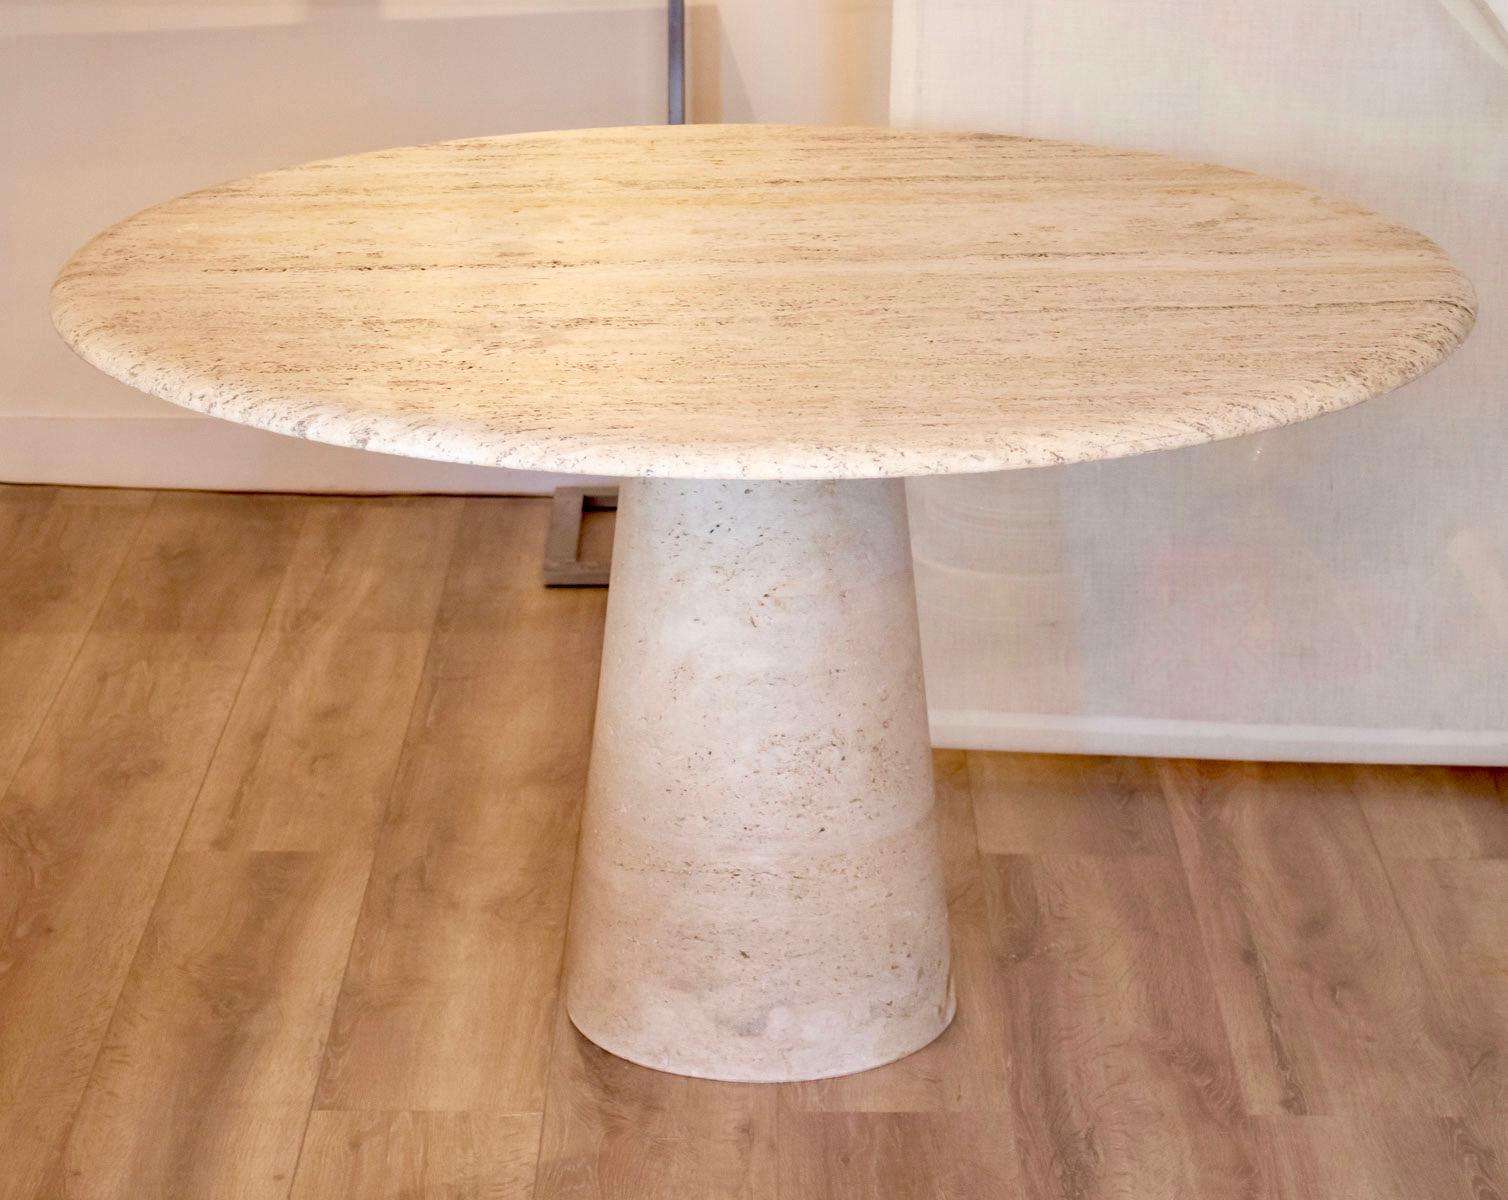 Elegant dining table made of polished travertine marble.
Round plate, 49.21 inches of diameter, with a conical foot, 28.34 inches of height.
Edited by the French furniture design publisher Roche Bobois in the 1960s.